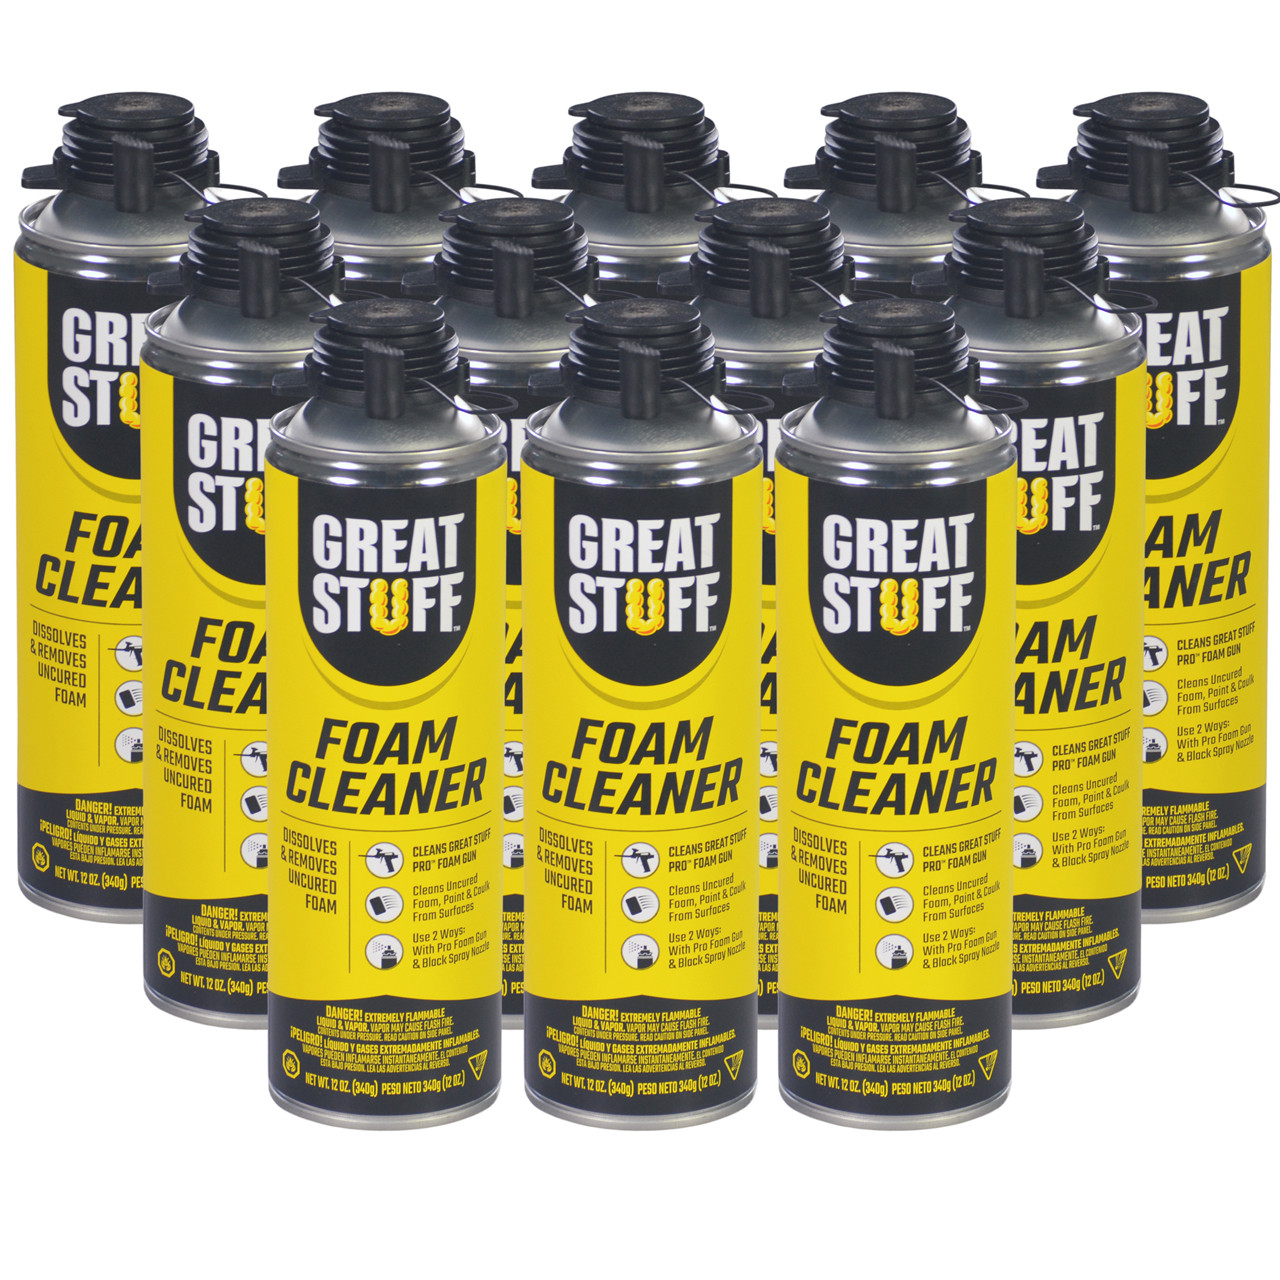 Great Stuff Pro Foam Cleaner, Case of 12 Cans